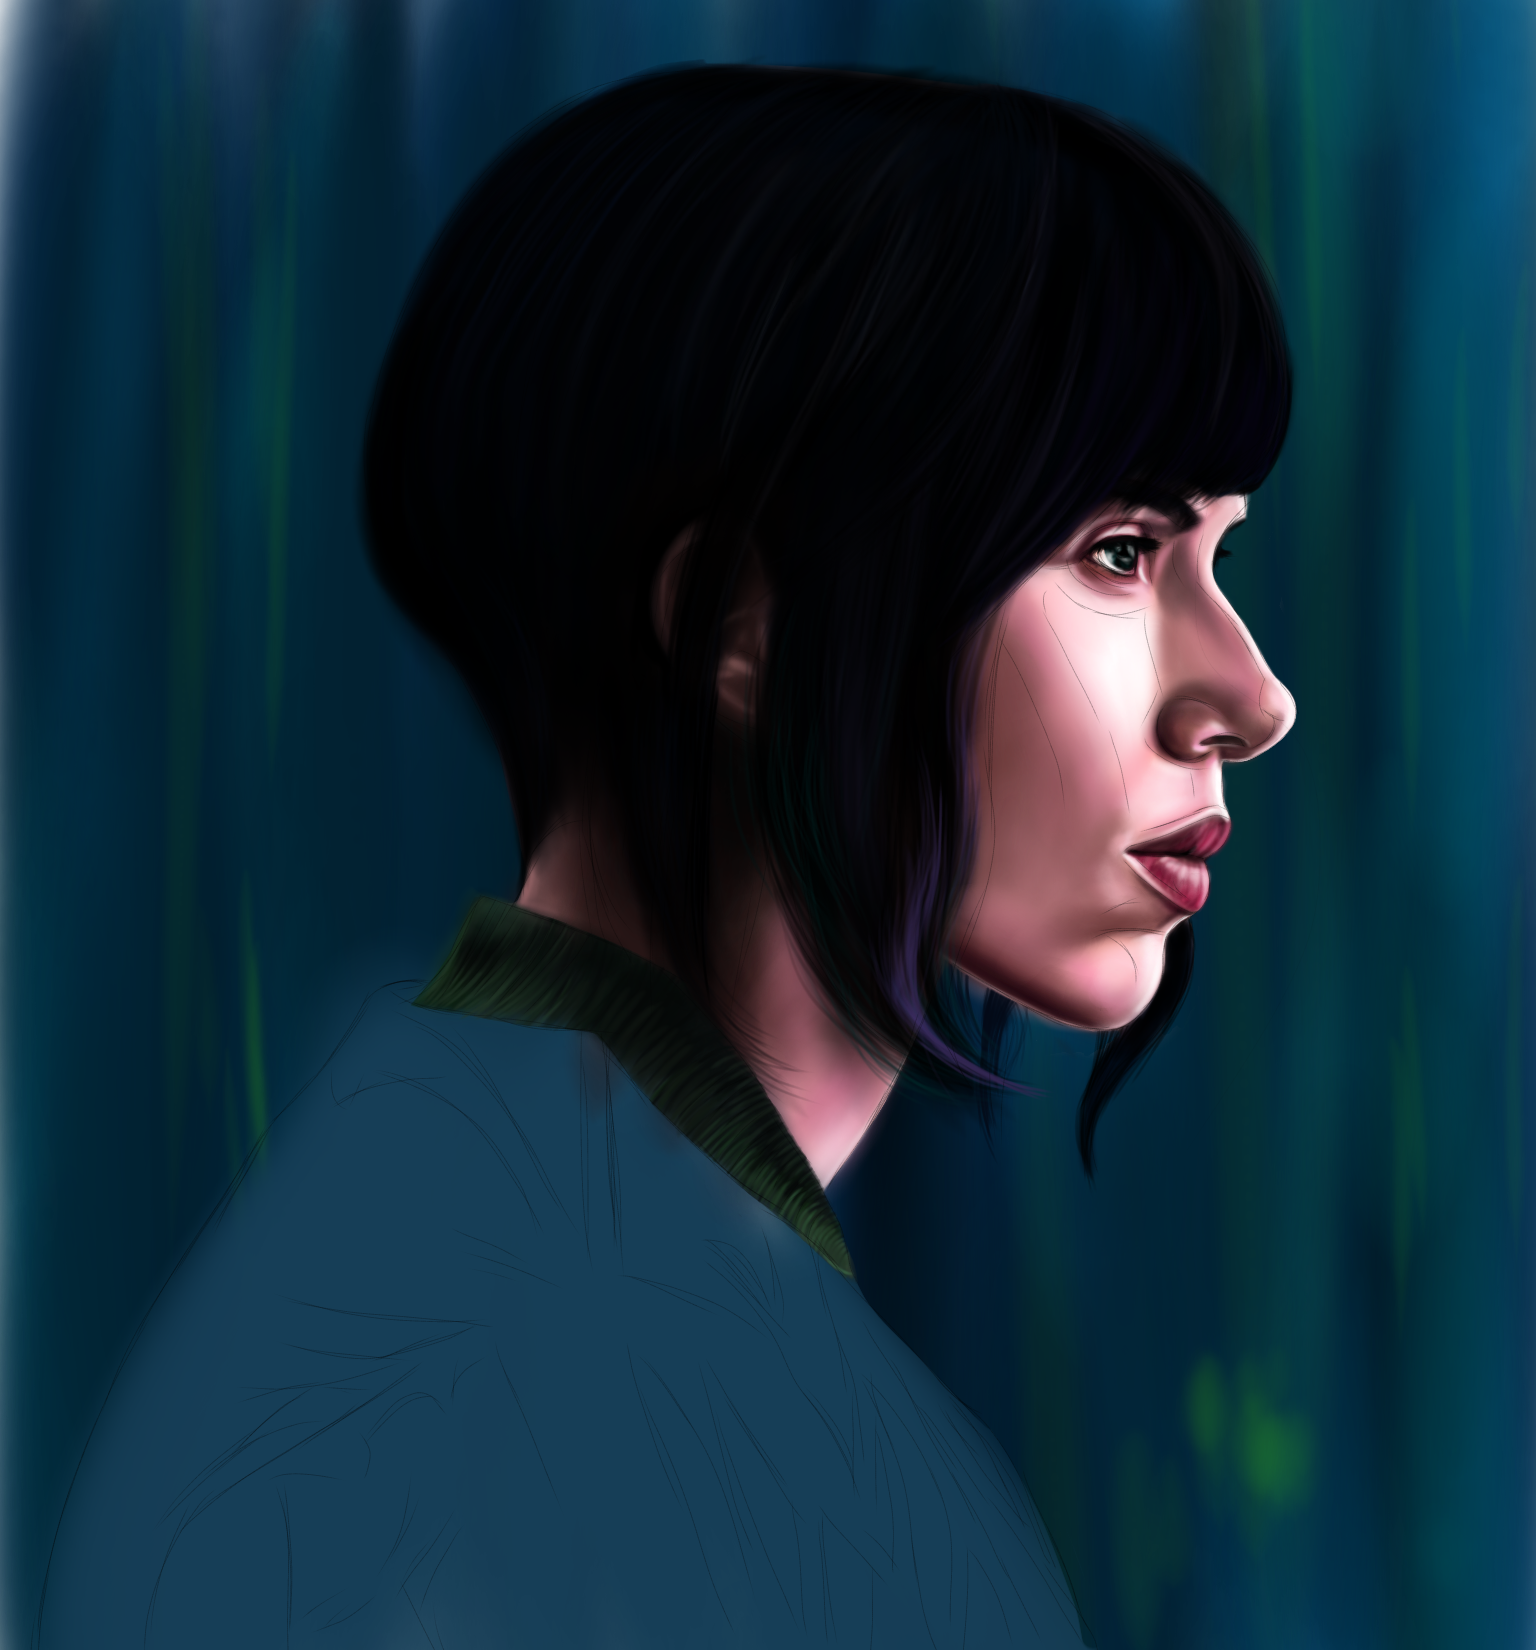 Francisftlp-Scarlett-Johansson-Ghost-in-the-Shell- Step 5.png